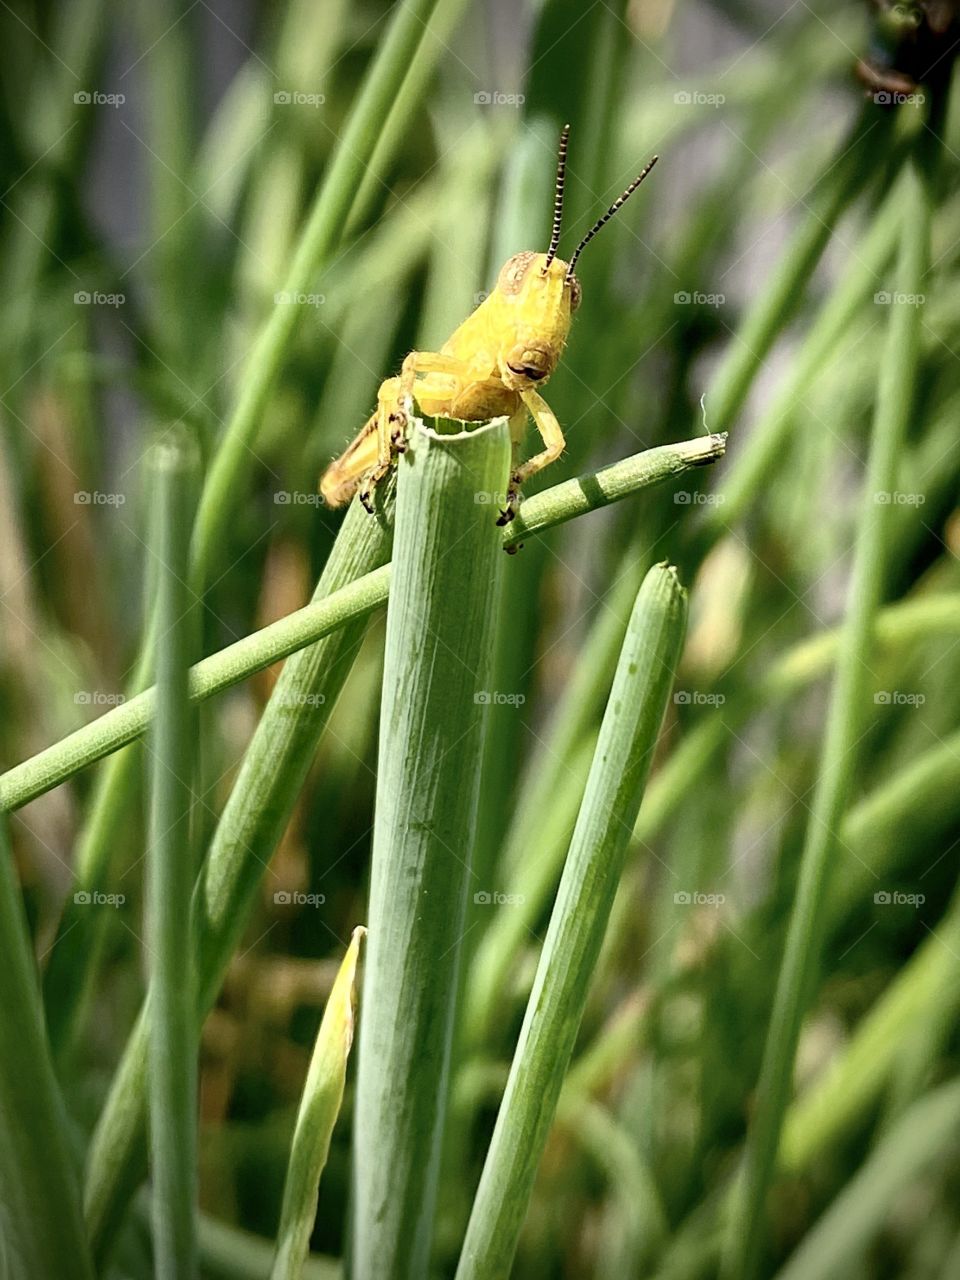 Stare down with a tiny green grasshopper perched on cut green chives